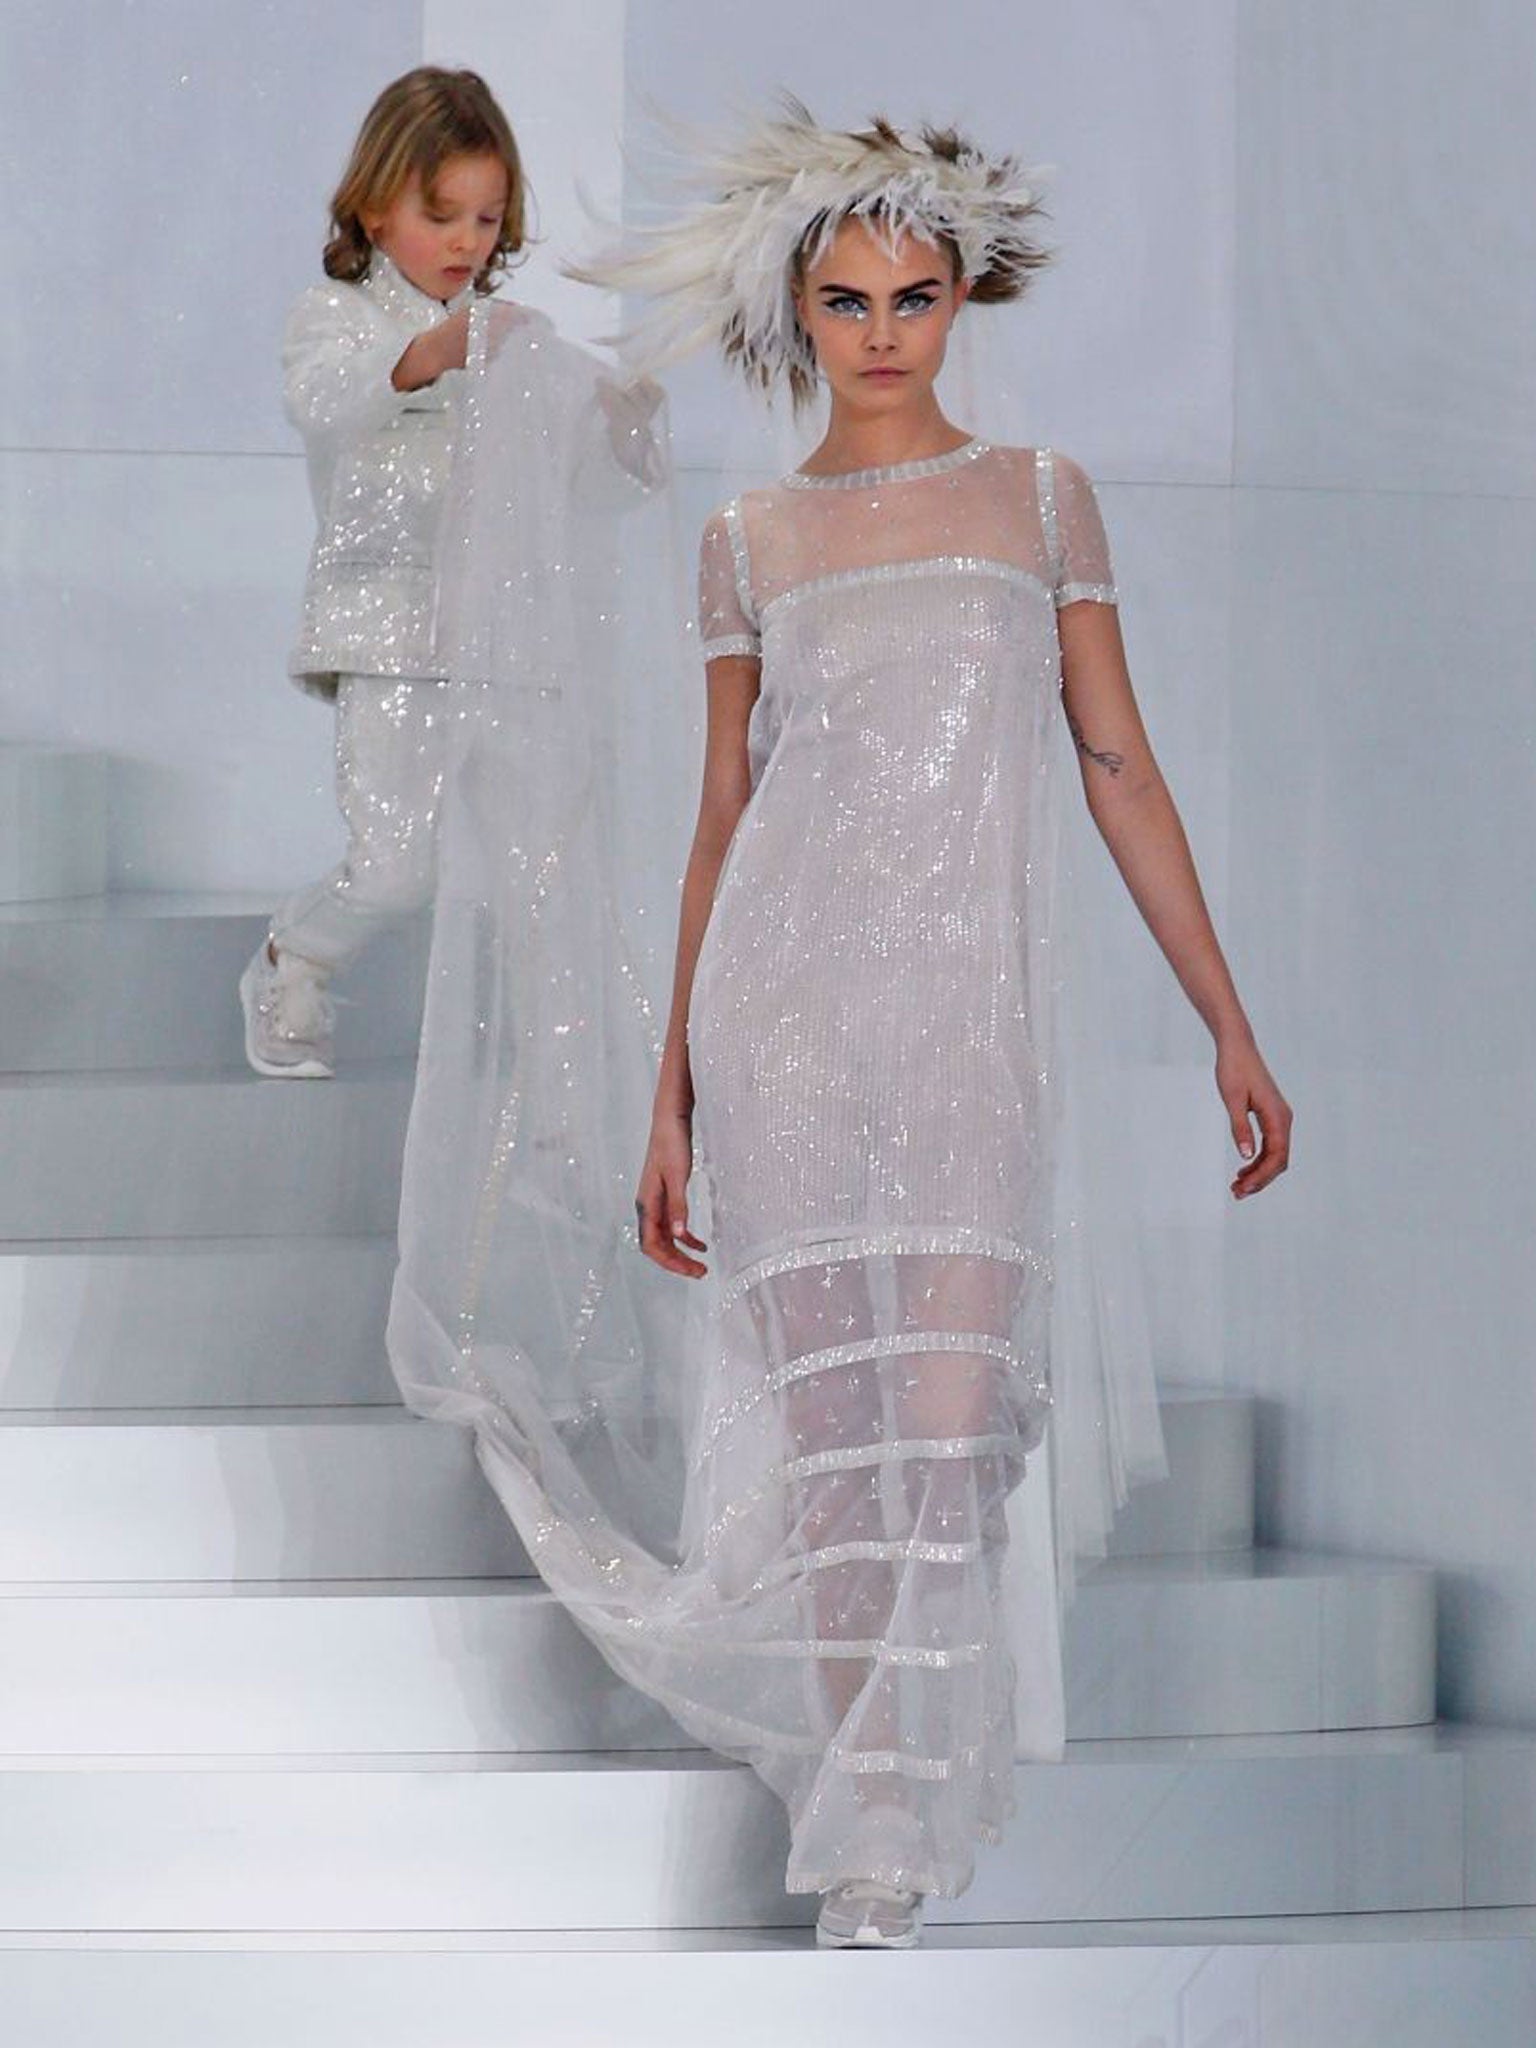 Chanel Haute Couture spring/summer 2014: Dynamic modernism and